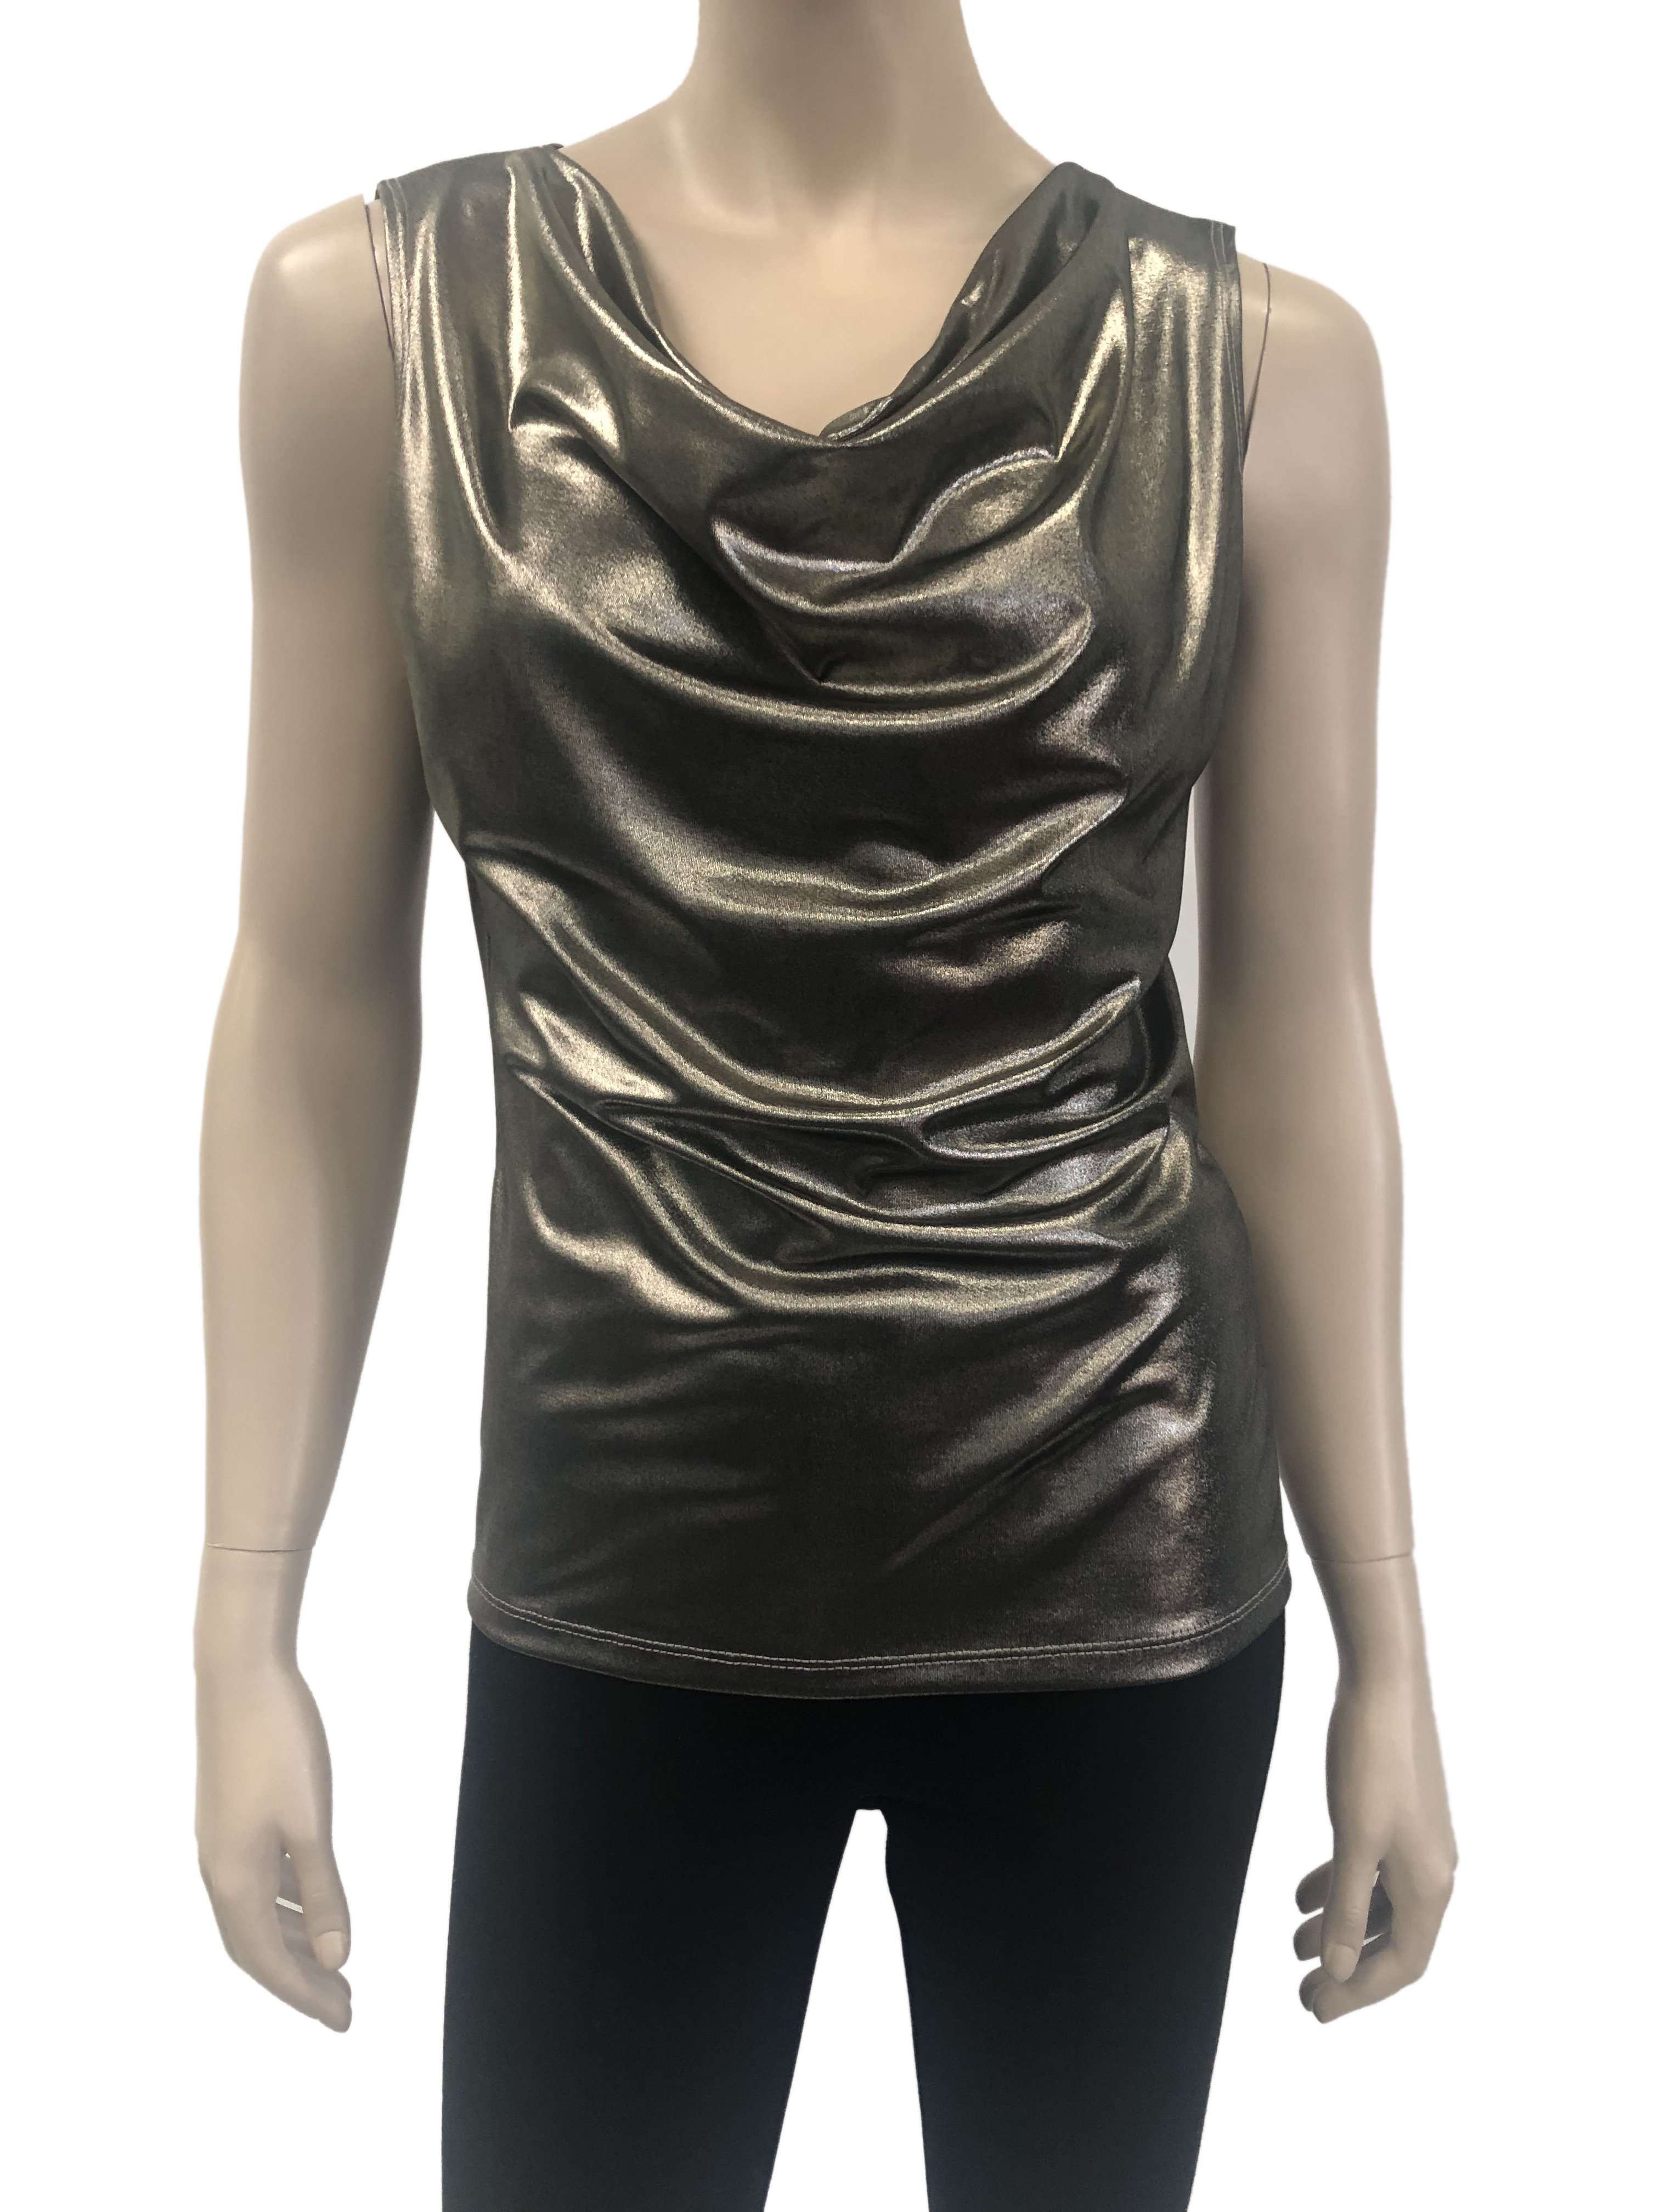 Women's Camisole Gold Quality Stretch Knit Fabric Special Occasions Weddings Made in Canada - Yvonne Marie - Yvonne Marie